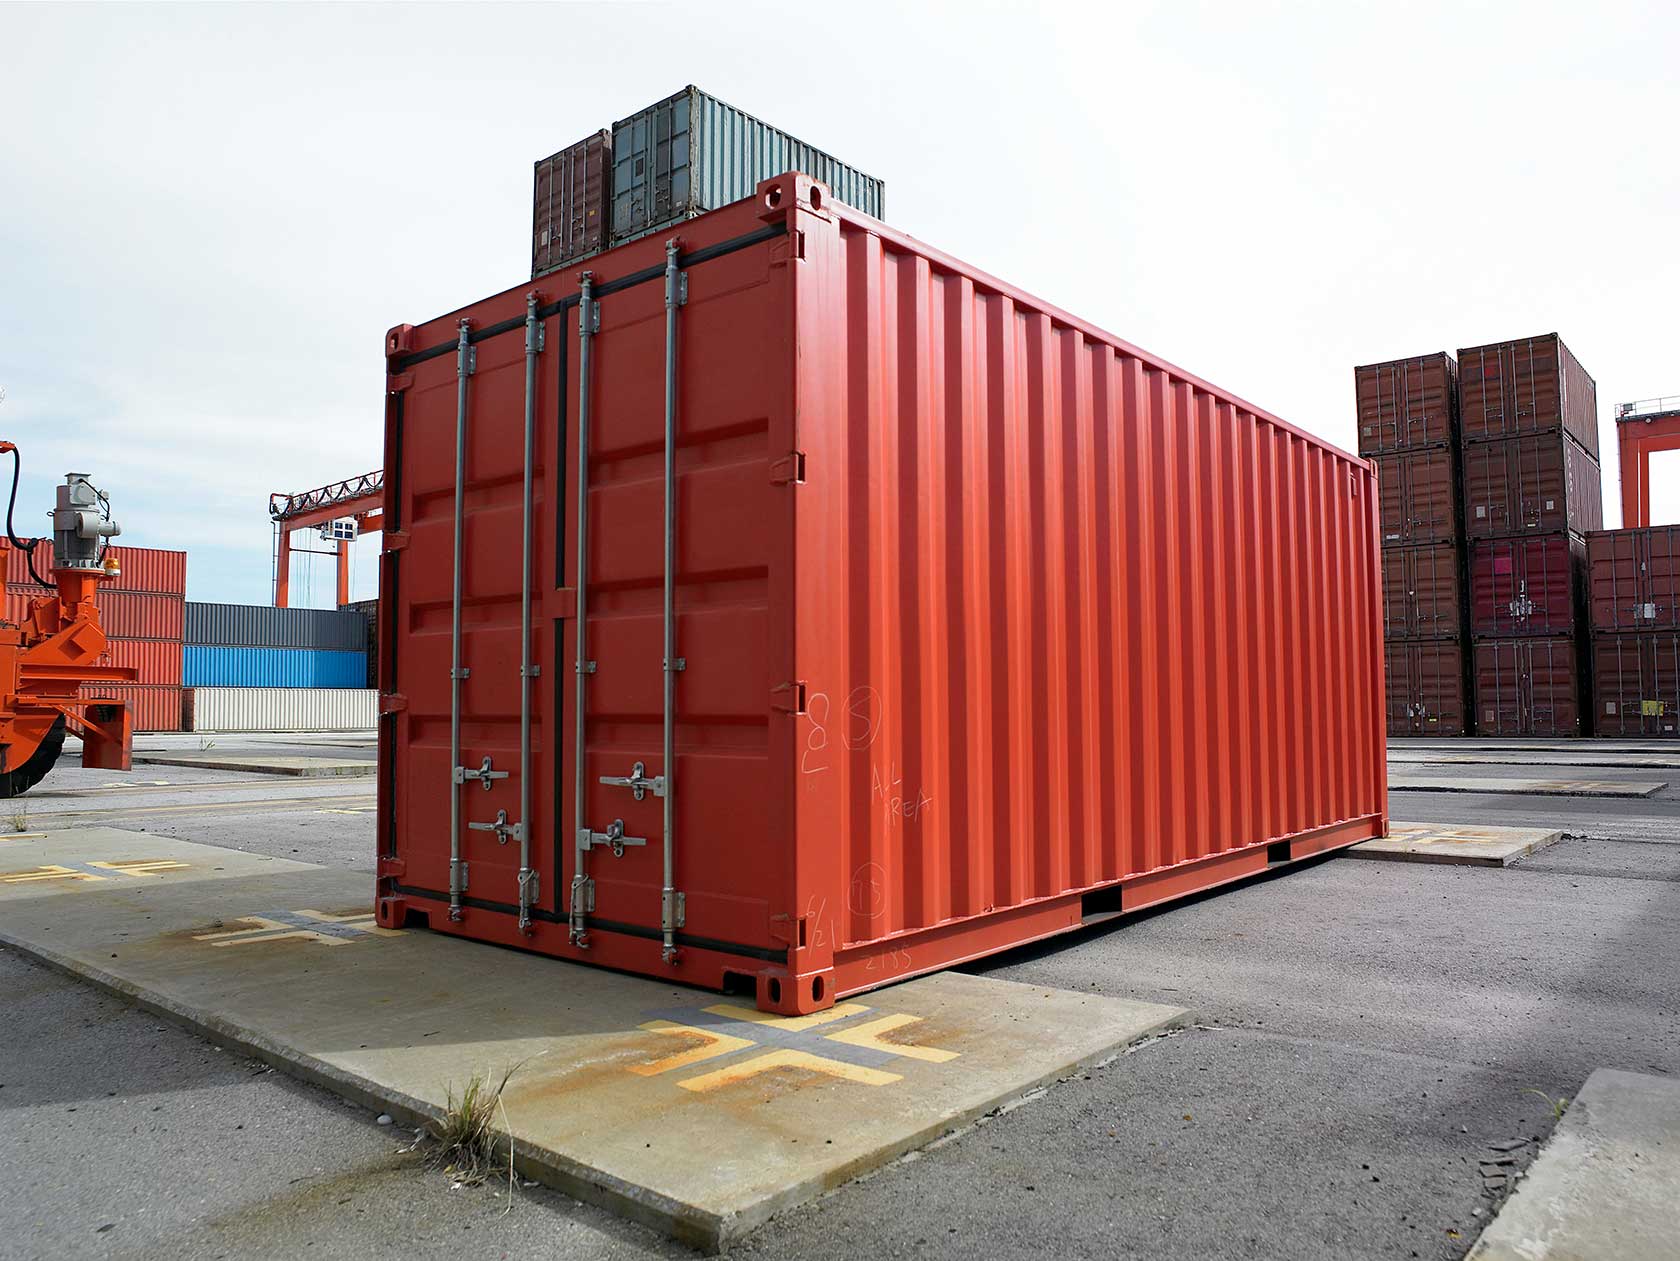 How To Buy A Used Shipping Container?